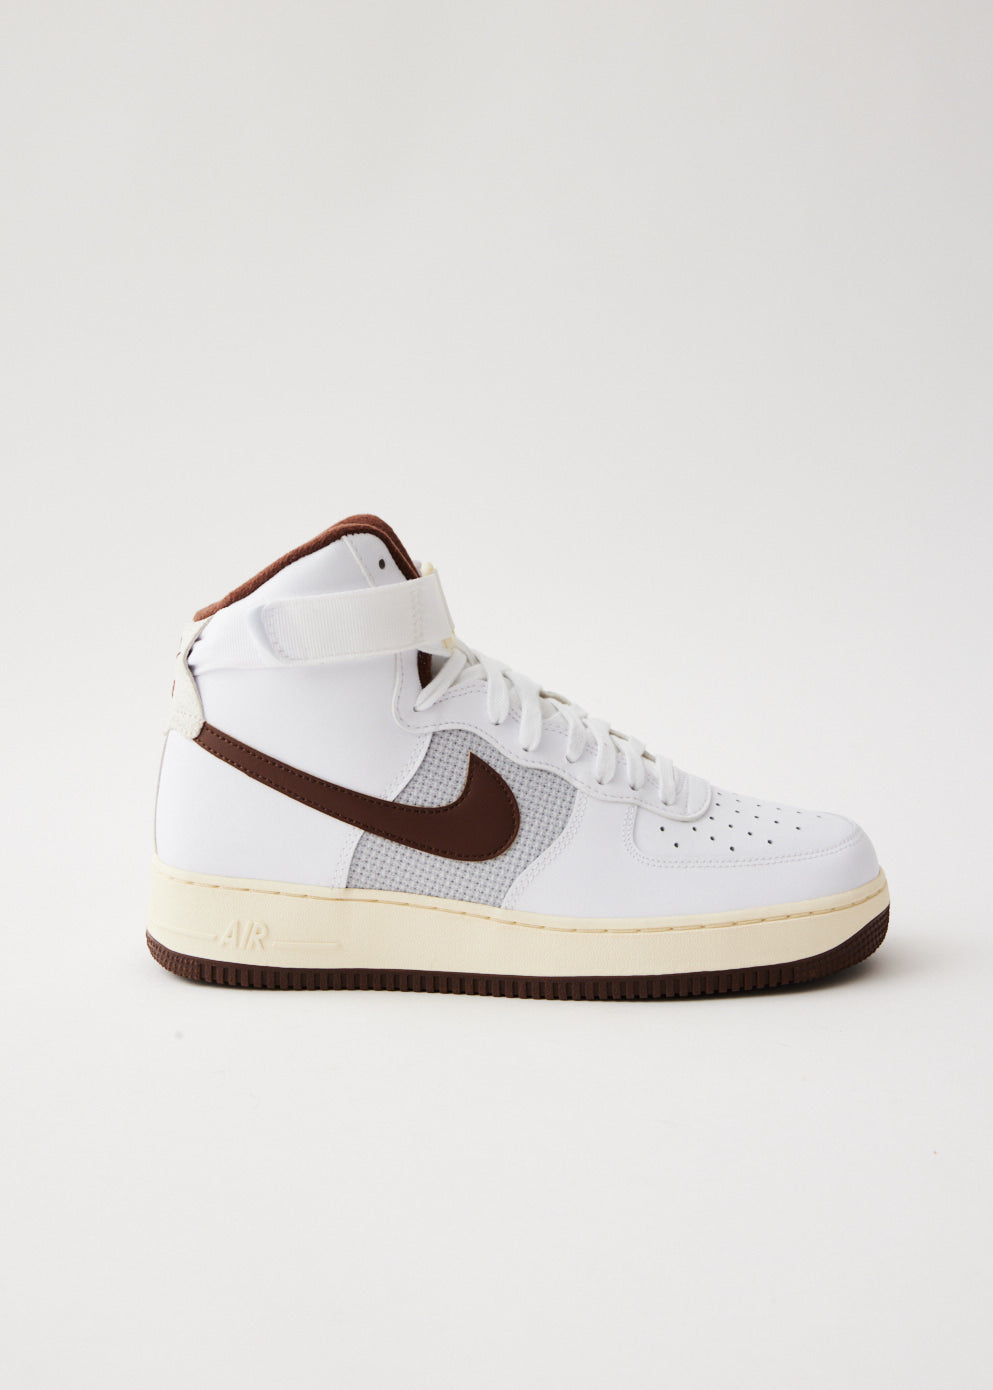 Nike Air Force 1 '07 LV8 - Do9801-100 - Sneakersnstuff (SNS)